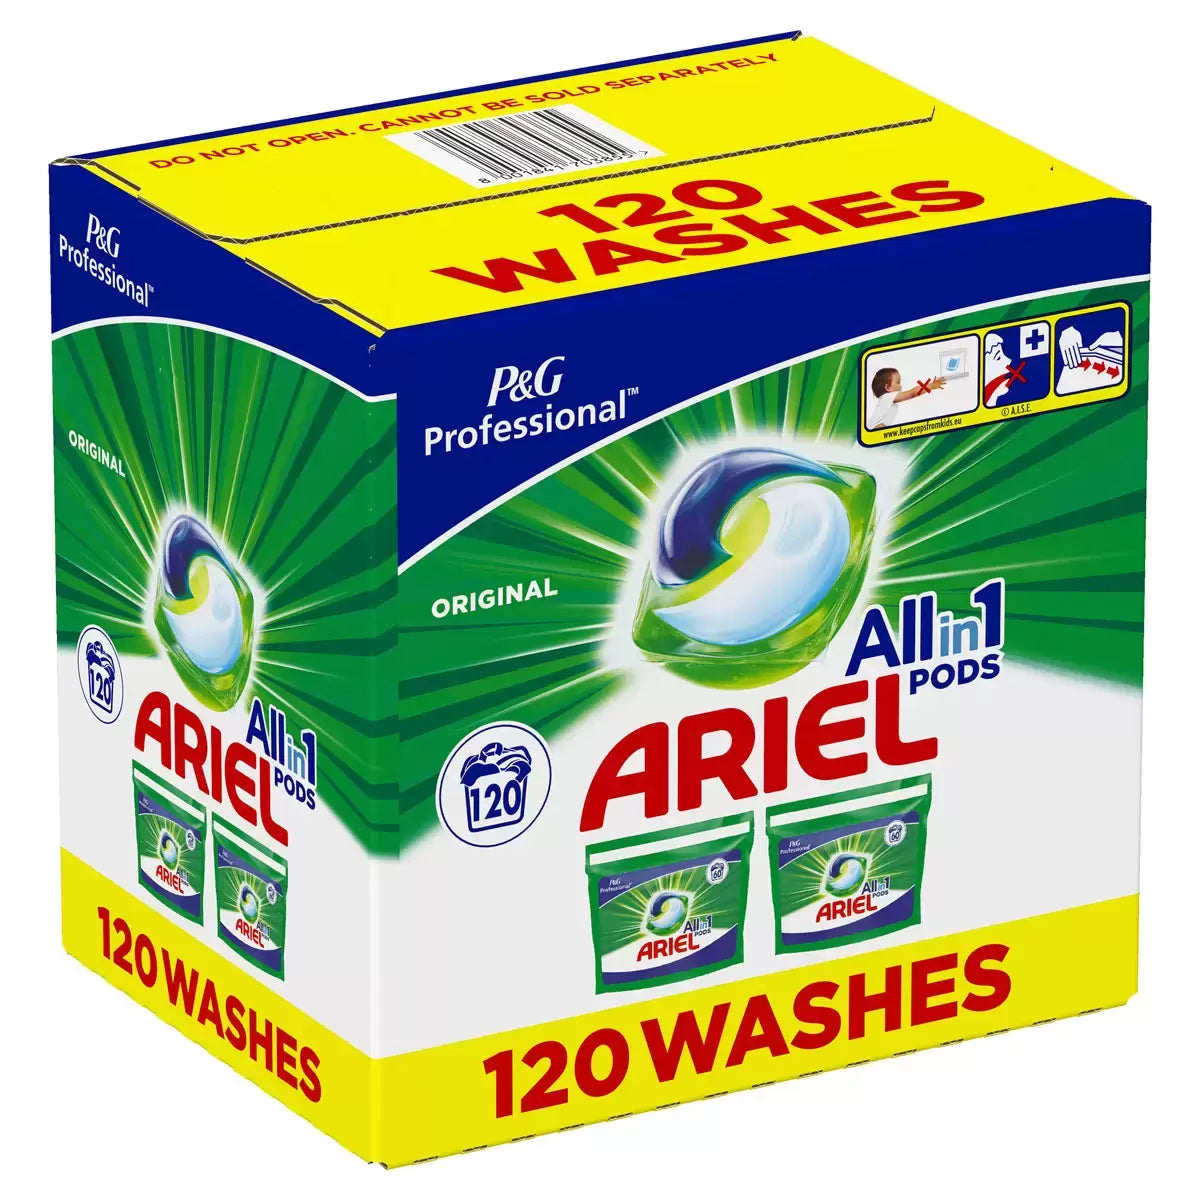 Ariel Original All In1 Pods 12 Washes Pmp £4.79